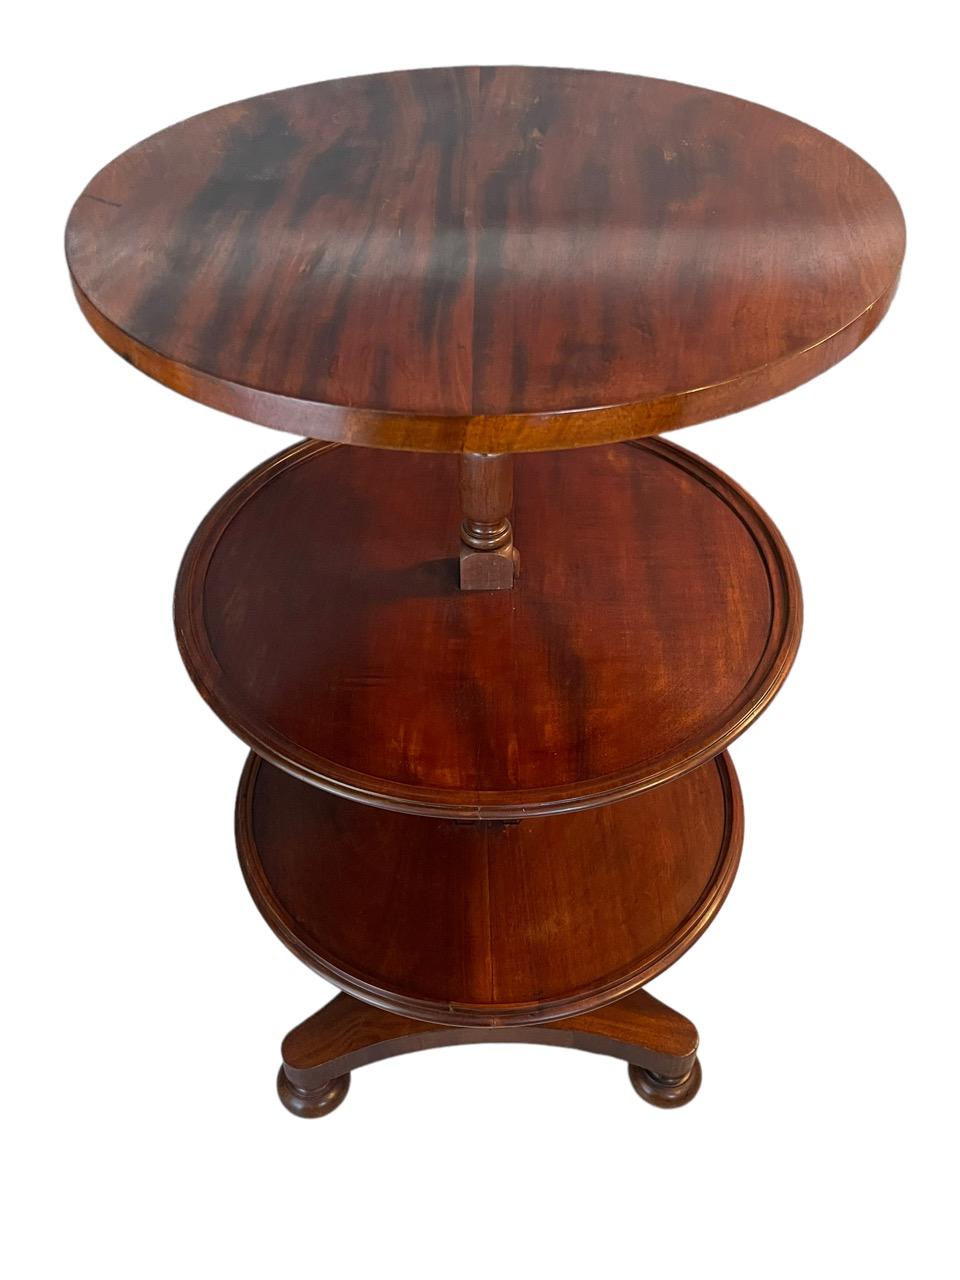 Introducing an exquisite 18th-century English mahogany dumbwaiter table, a masterpiece of craftsmanship and versatility. This remarkable piece features an elegantly turned stem that gracefully supports three dish tops of equal size. What truly sets